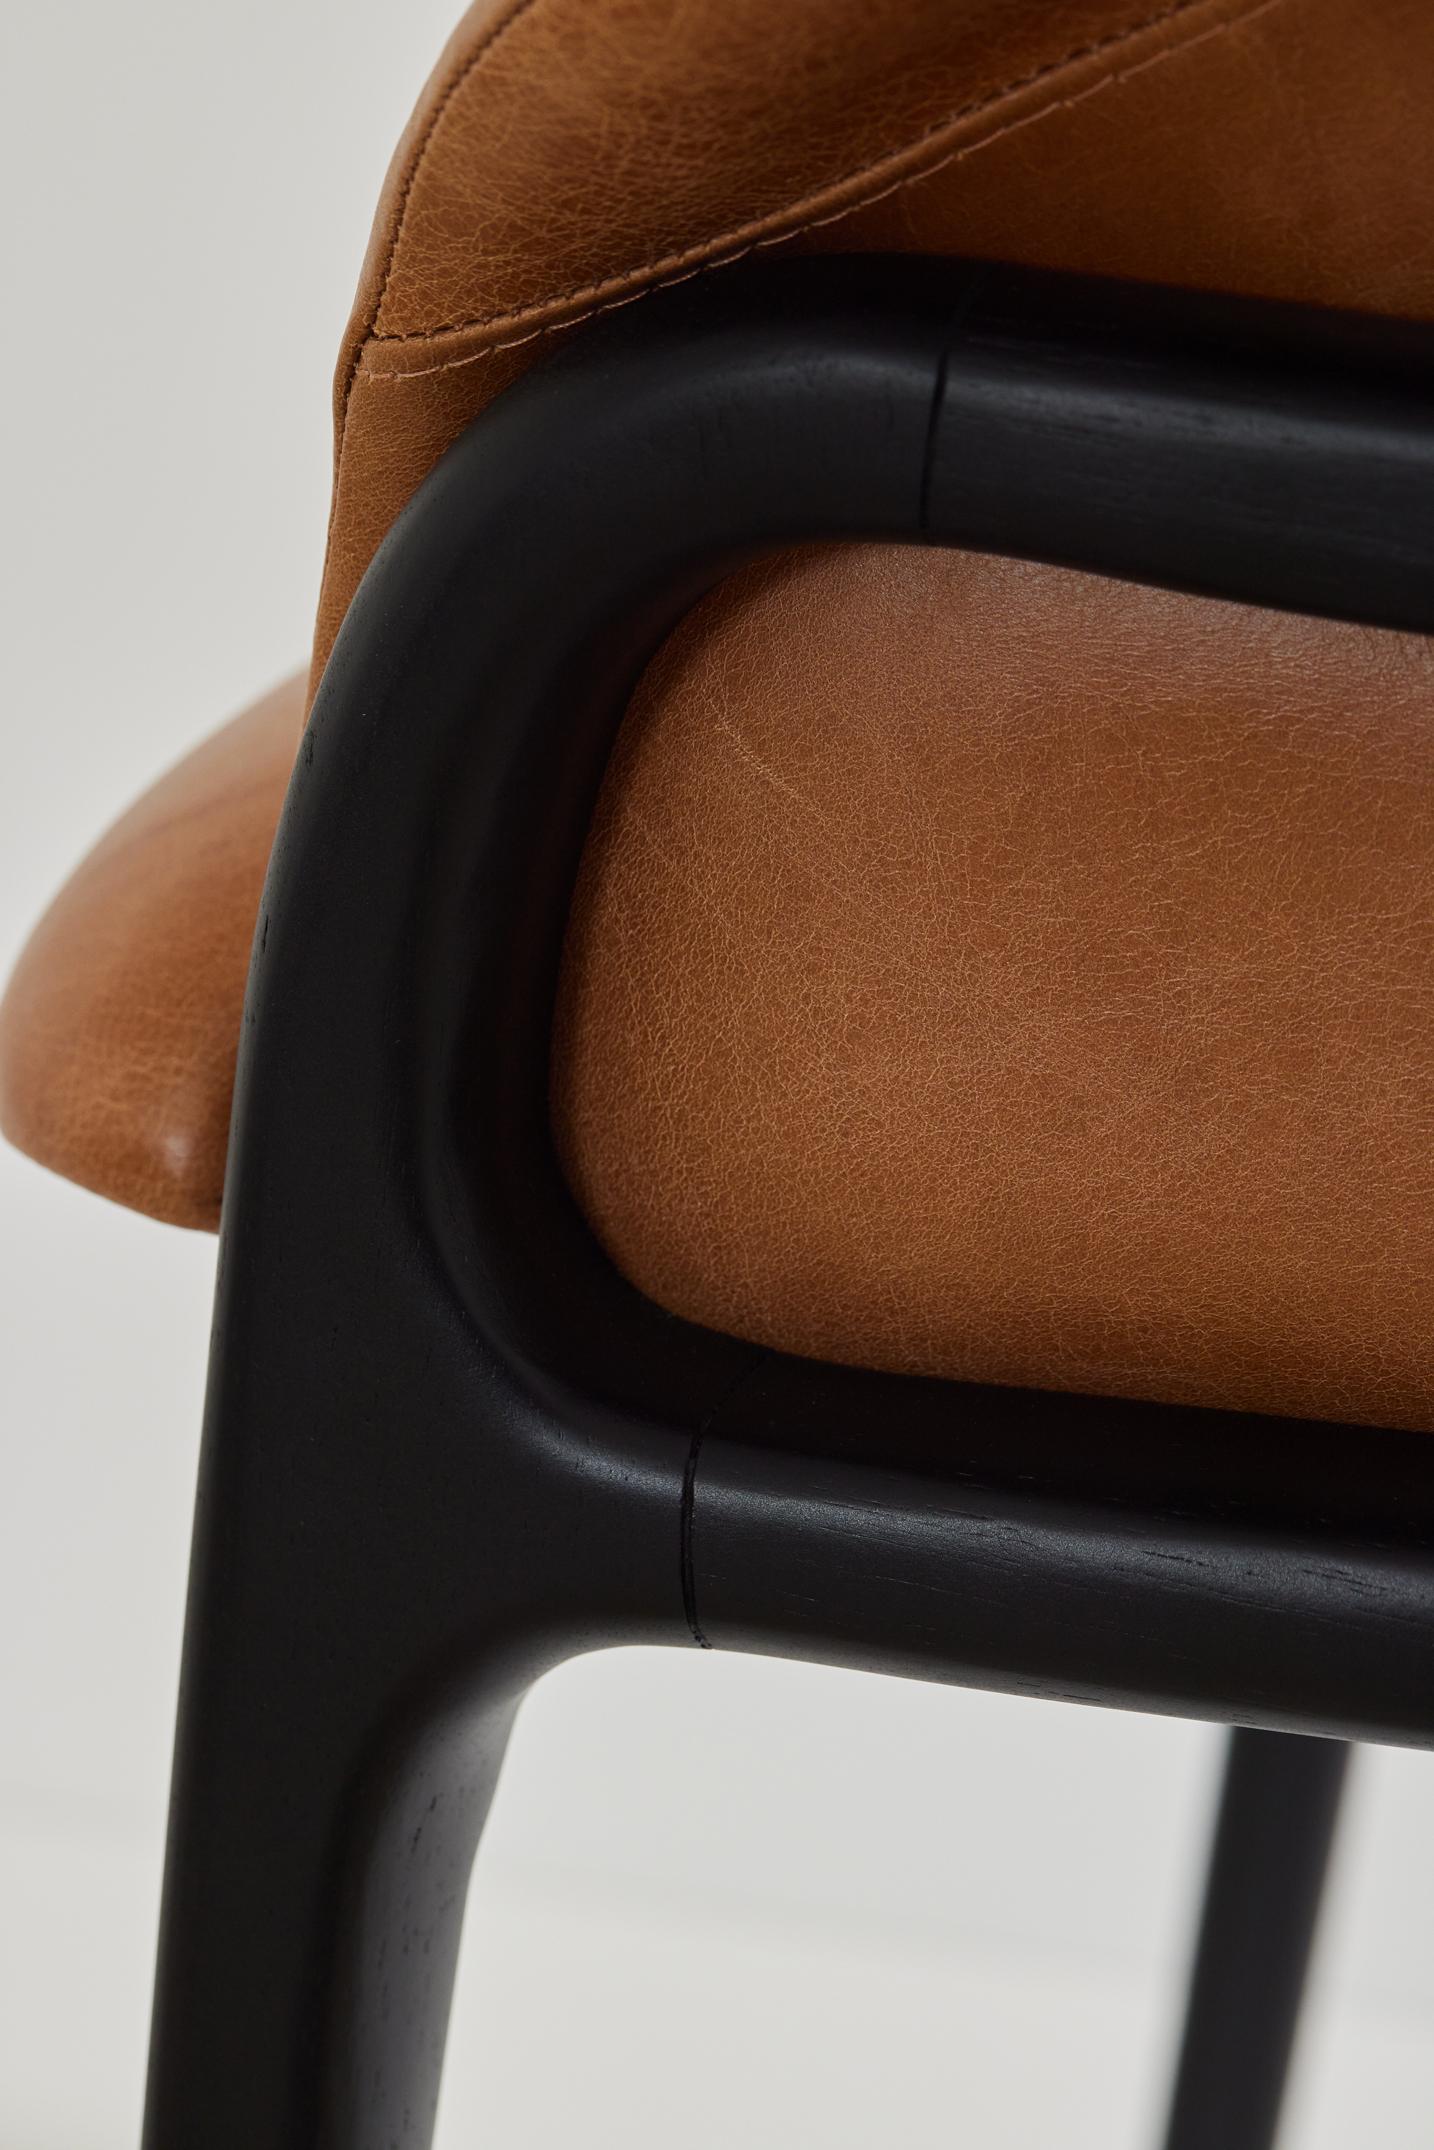 Contemporary Minimalist Organic Chair in black Solid Wood, camel leather Seating tone For Sale